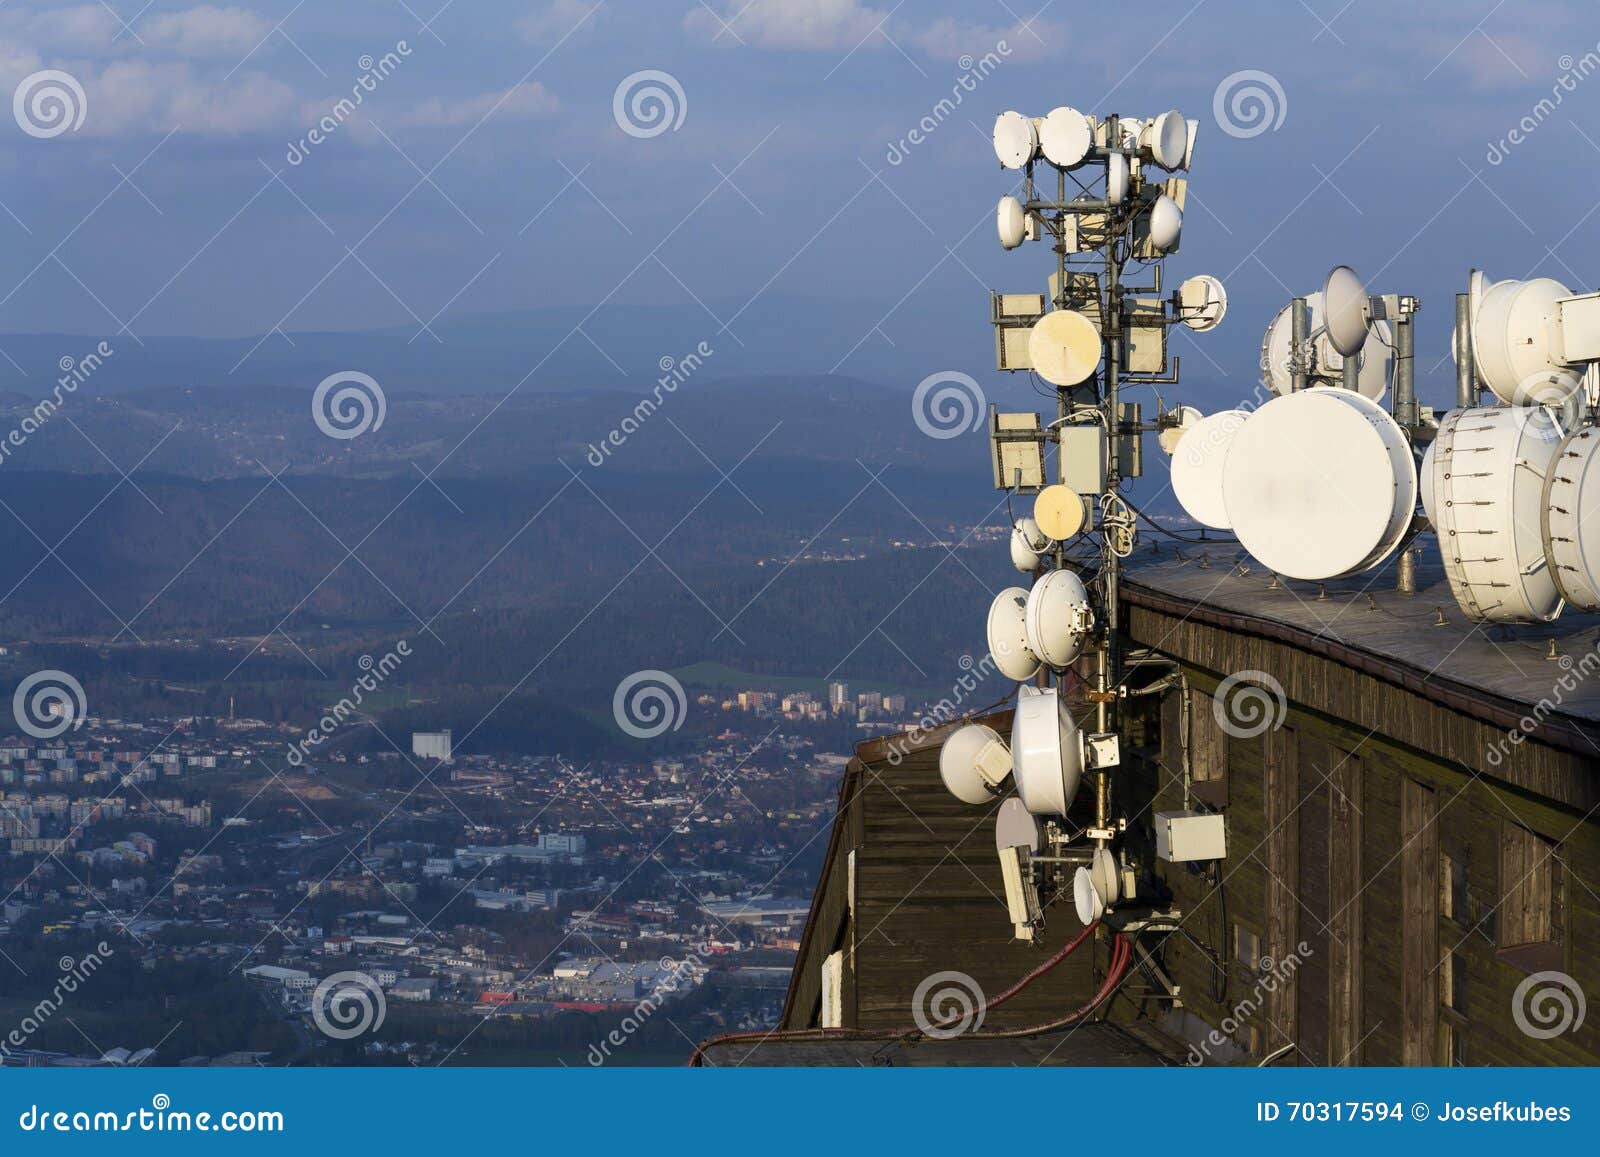 transmitters and aerials on the telecommunication tower during sunset